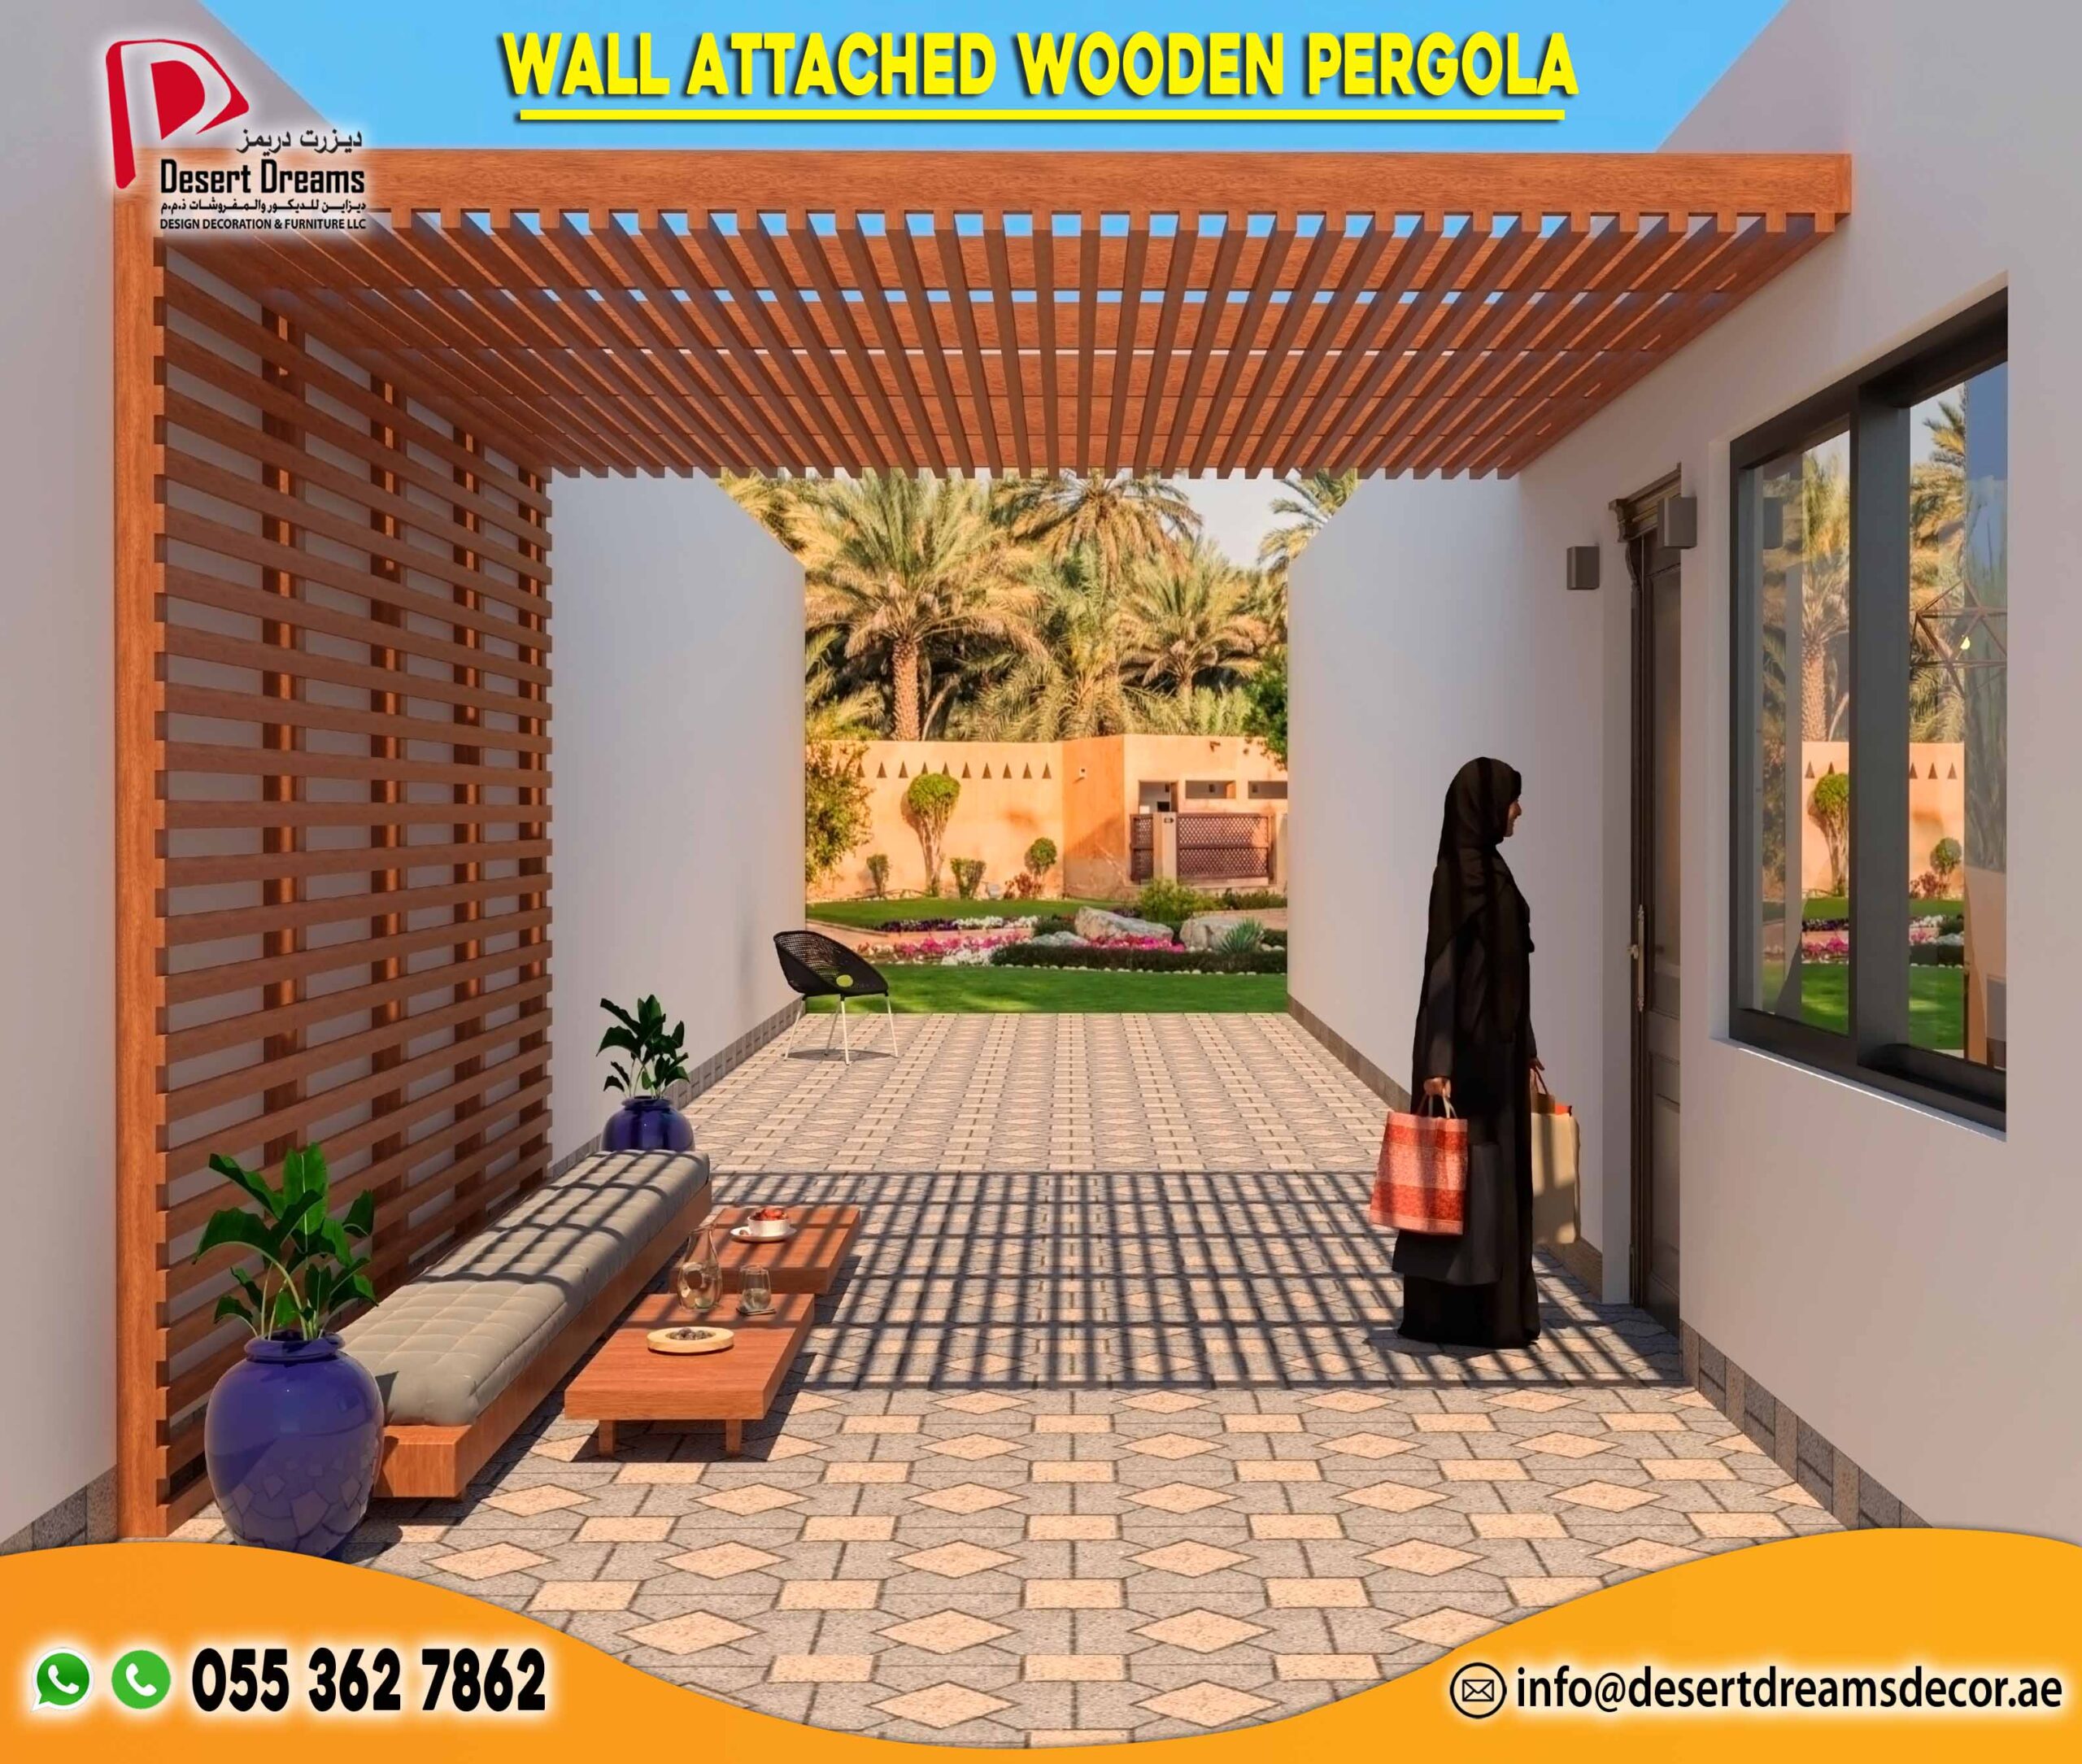 Wall Attached Wooden Pergola Suppliers in UAE.jpg